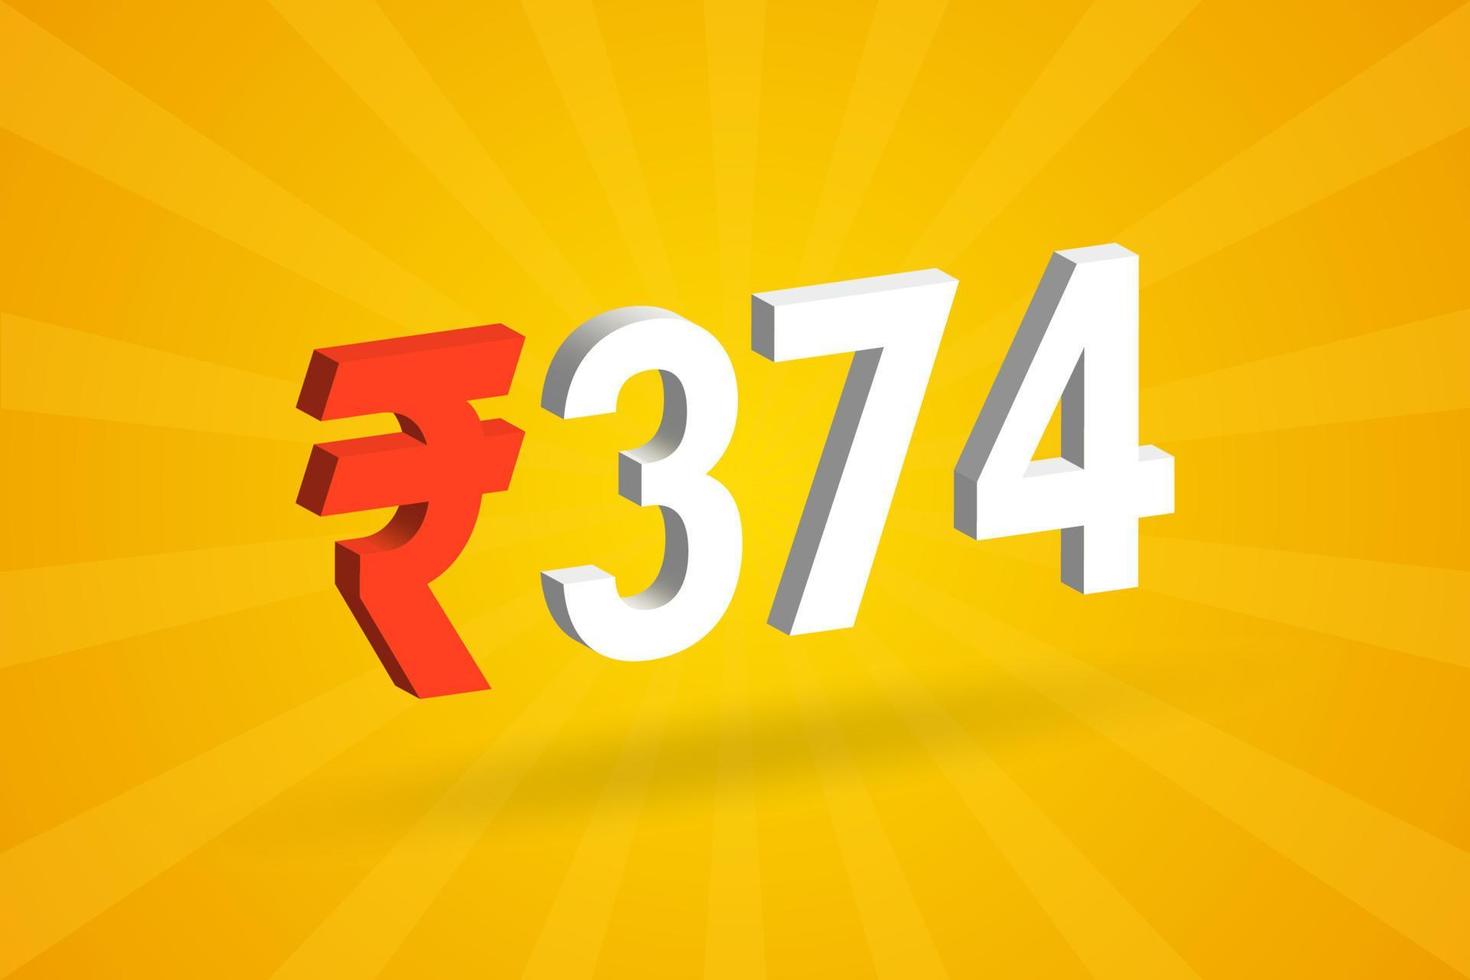 374 Rupee 3D symbol bold text vector image. 3D 374 Indian Rupee currency sign vector illustration